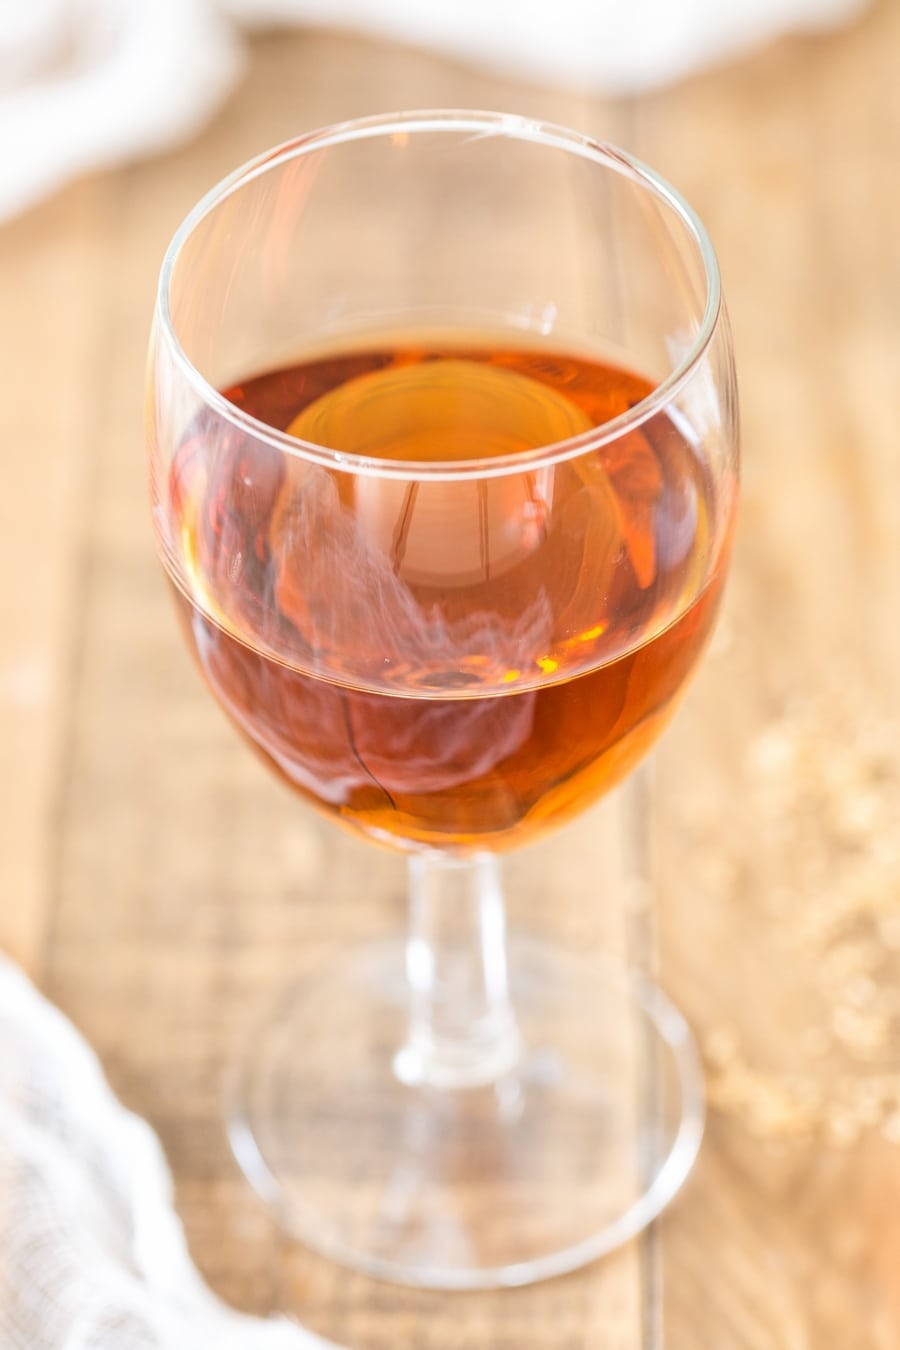 A glass of marsala fortified wine on a wooden table.